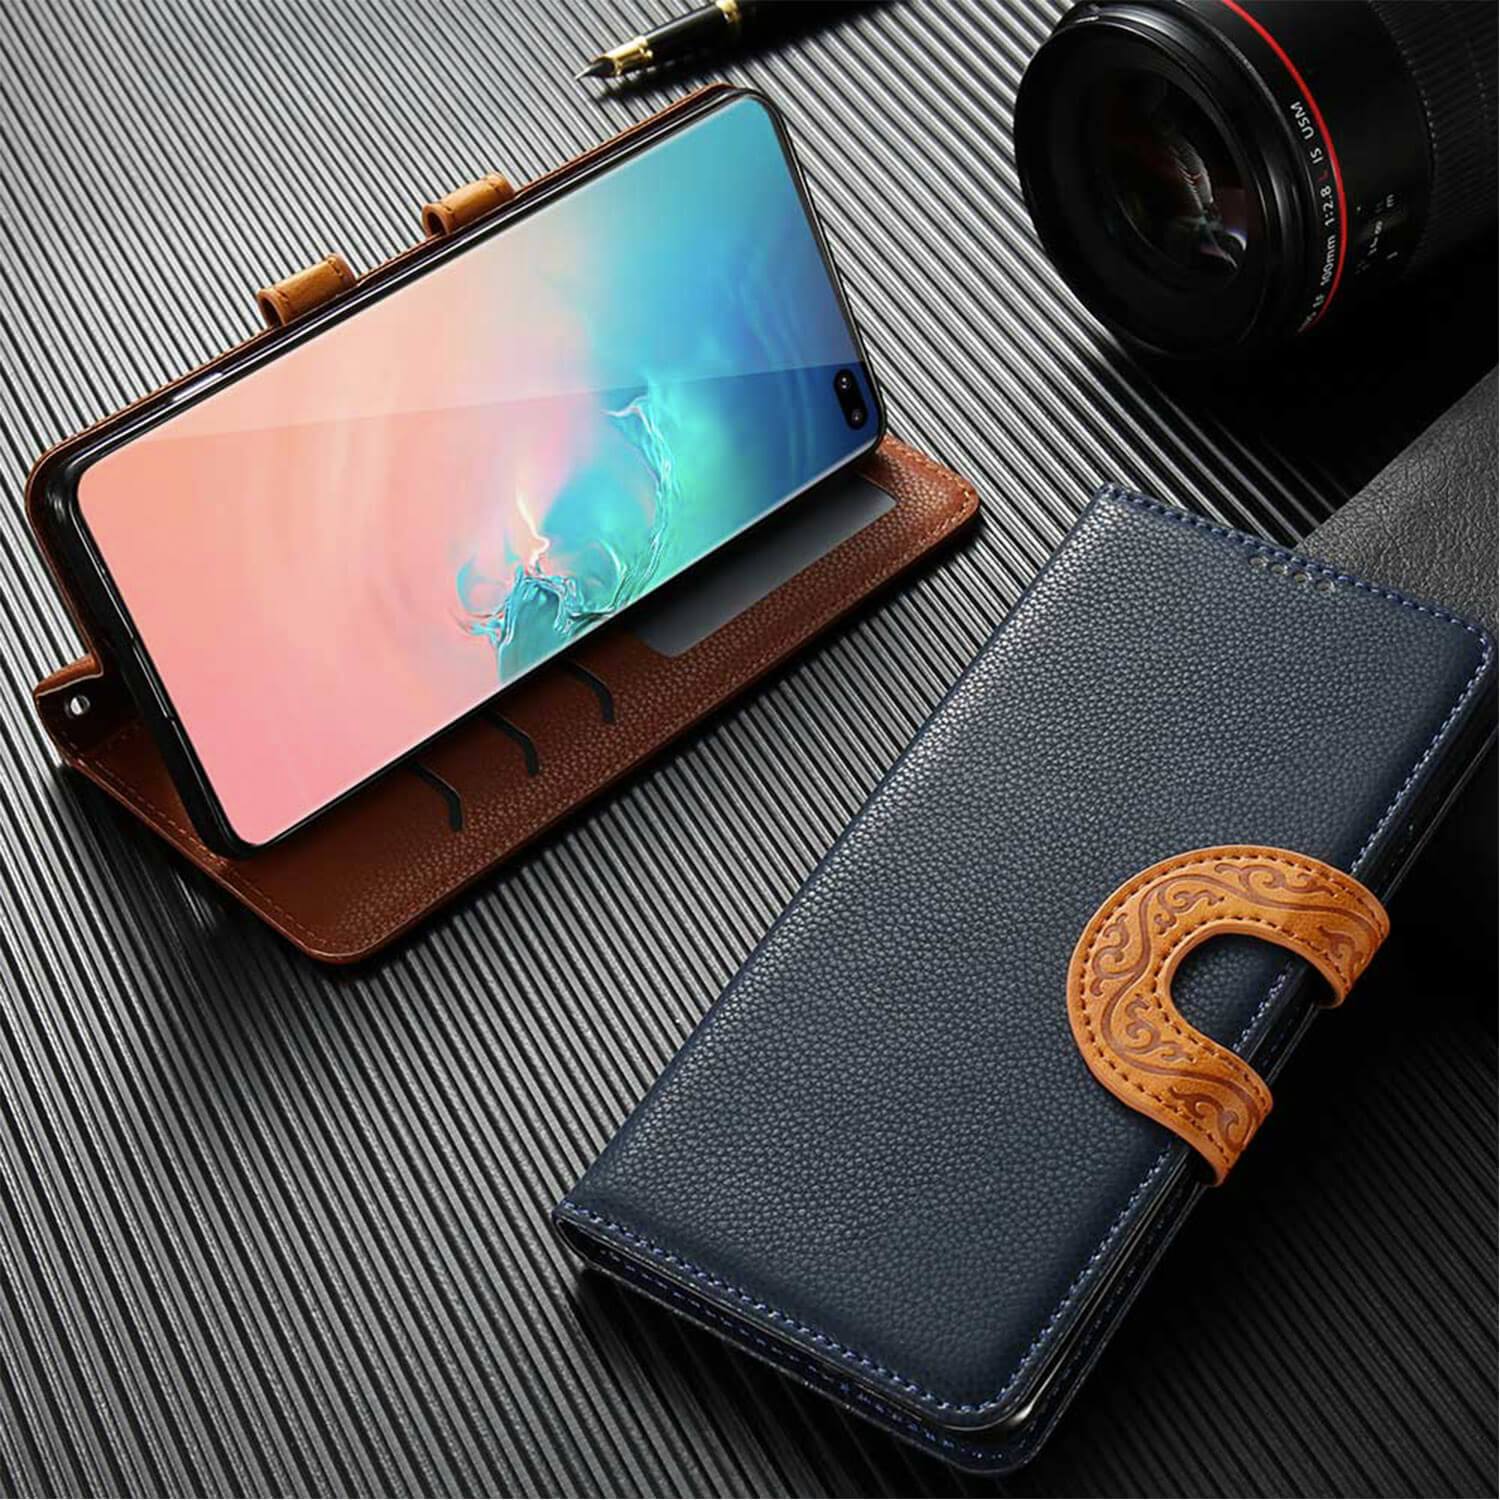 Samsung Galaxy S10+ Case - Leather, Card Slots, Tribal Strap